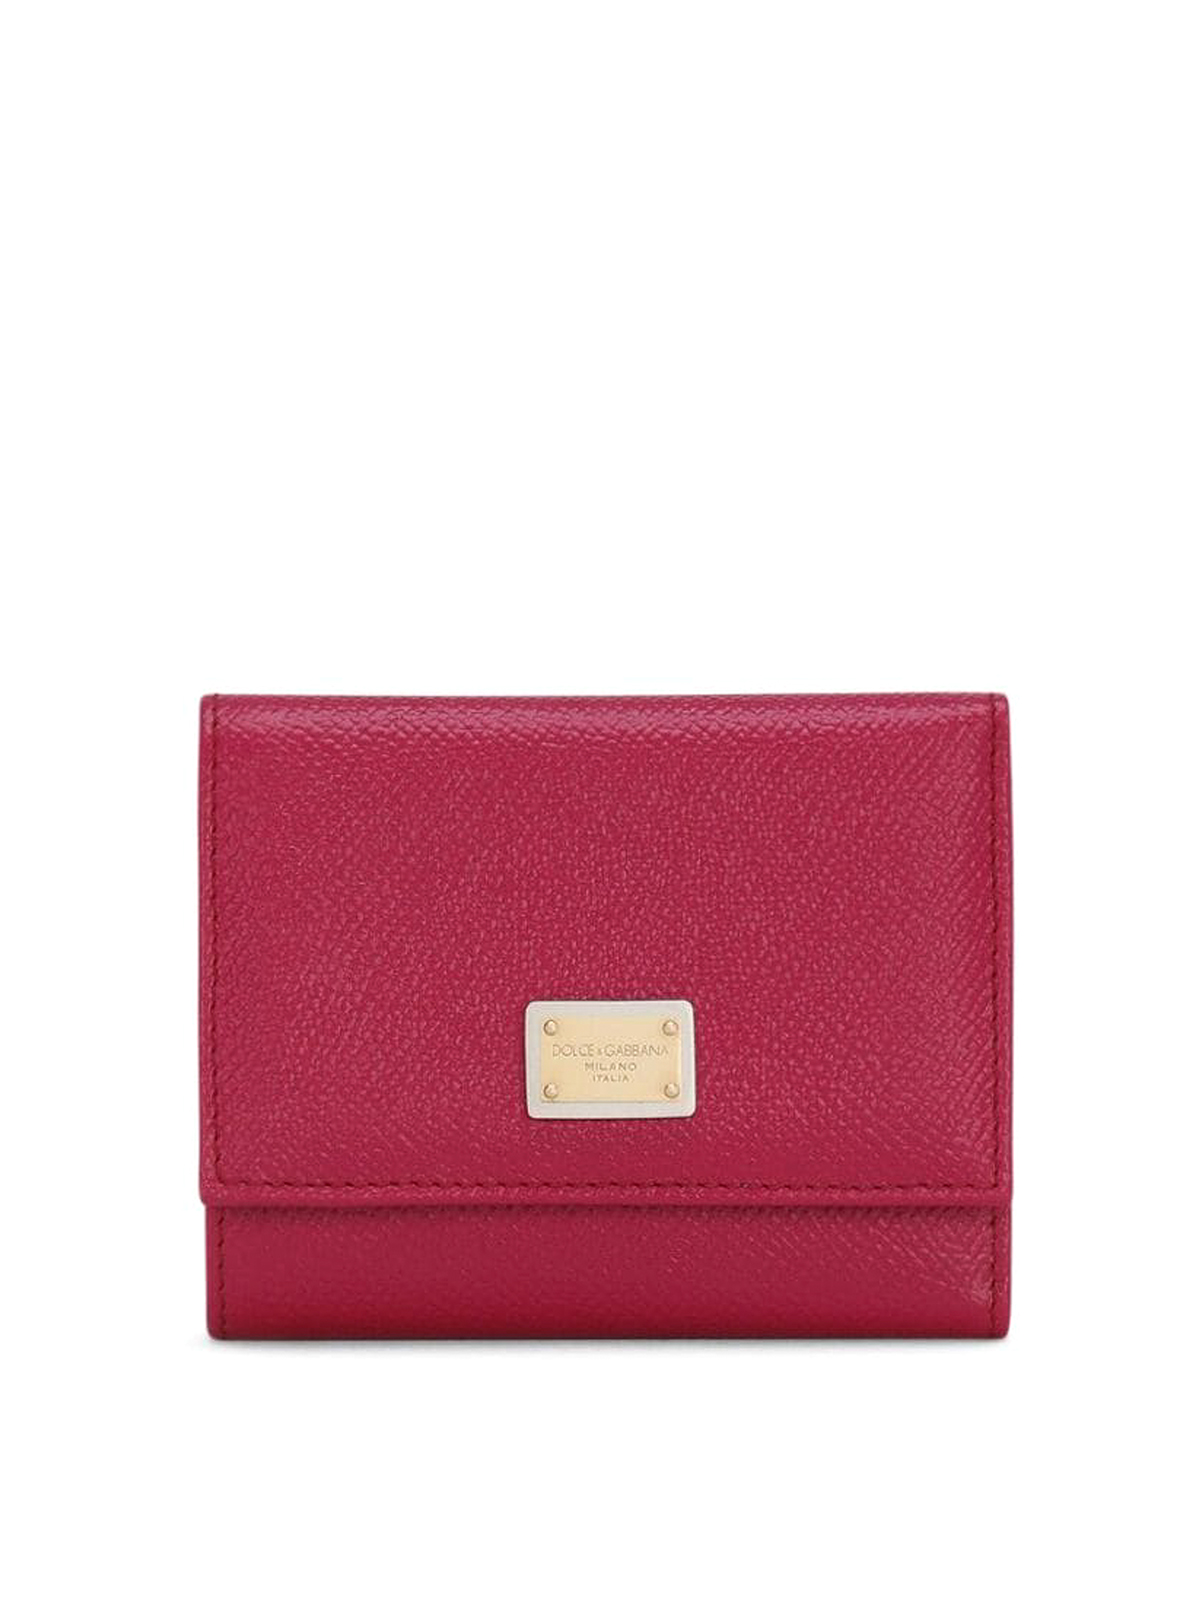 Dolce & Gabbana Leather Flap Wallet In Red